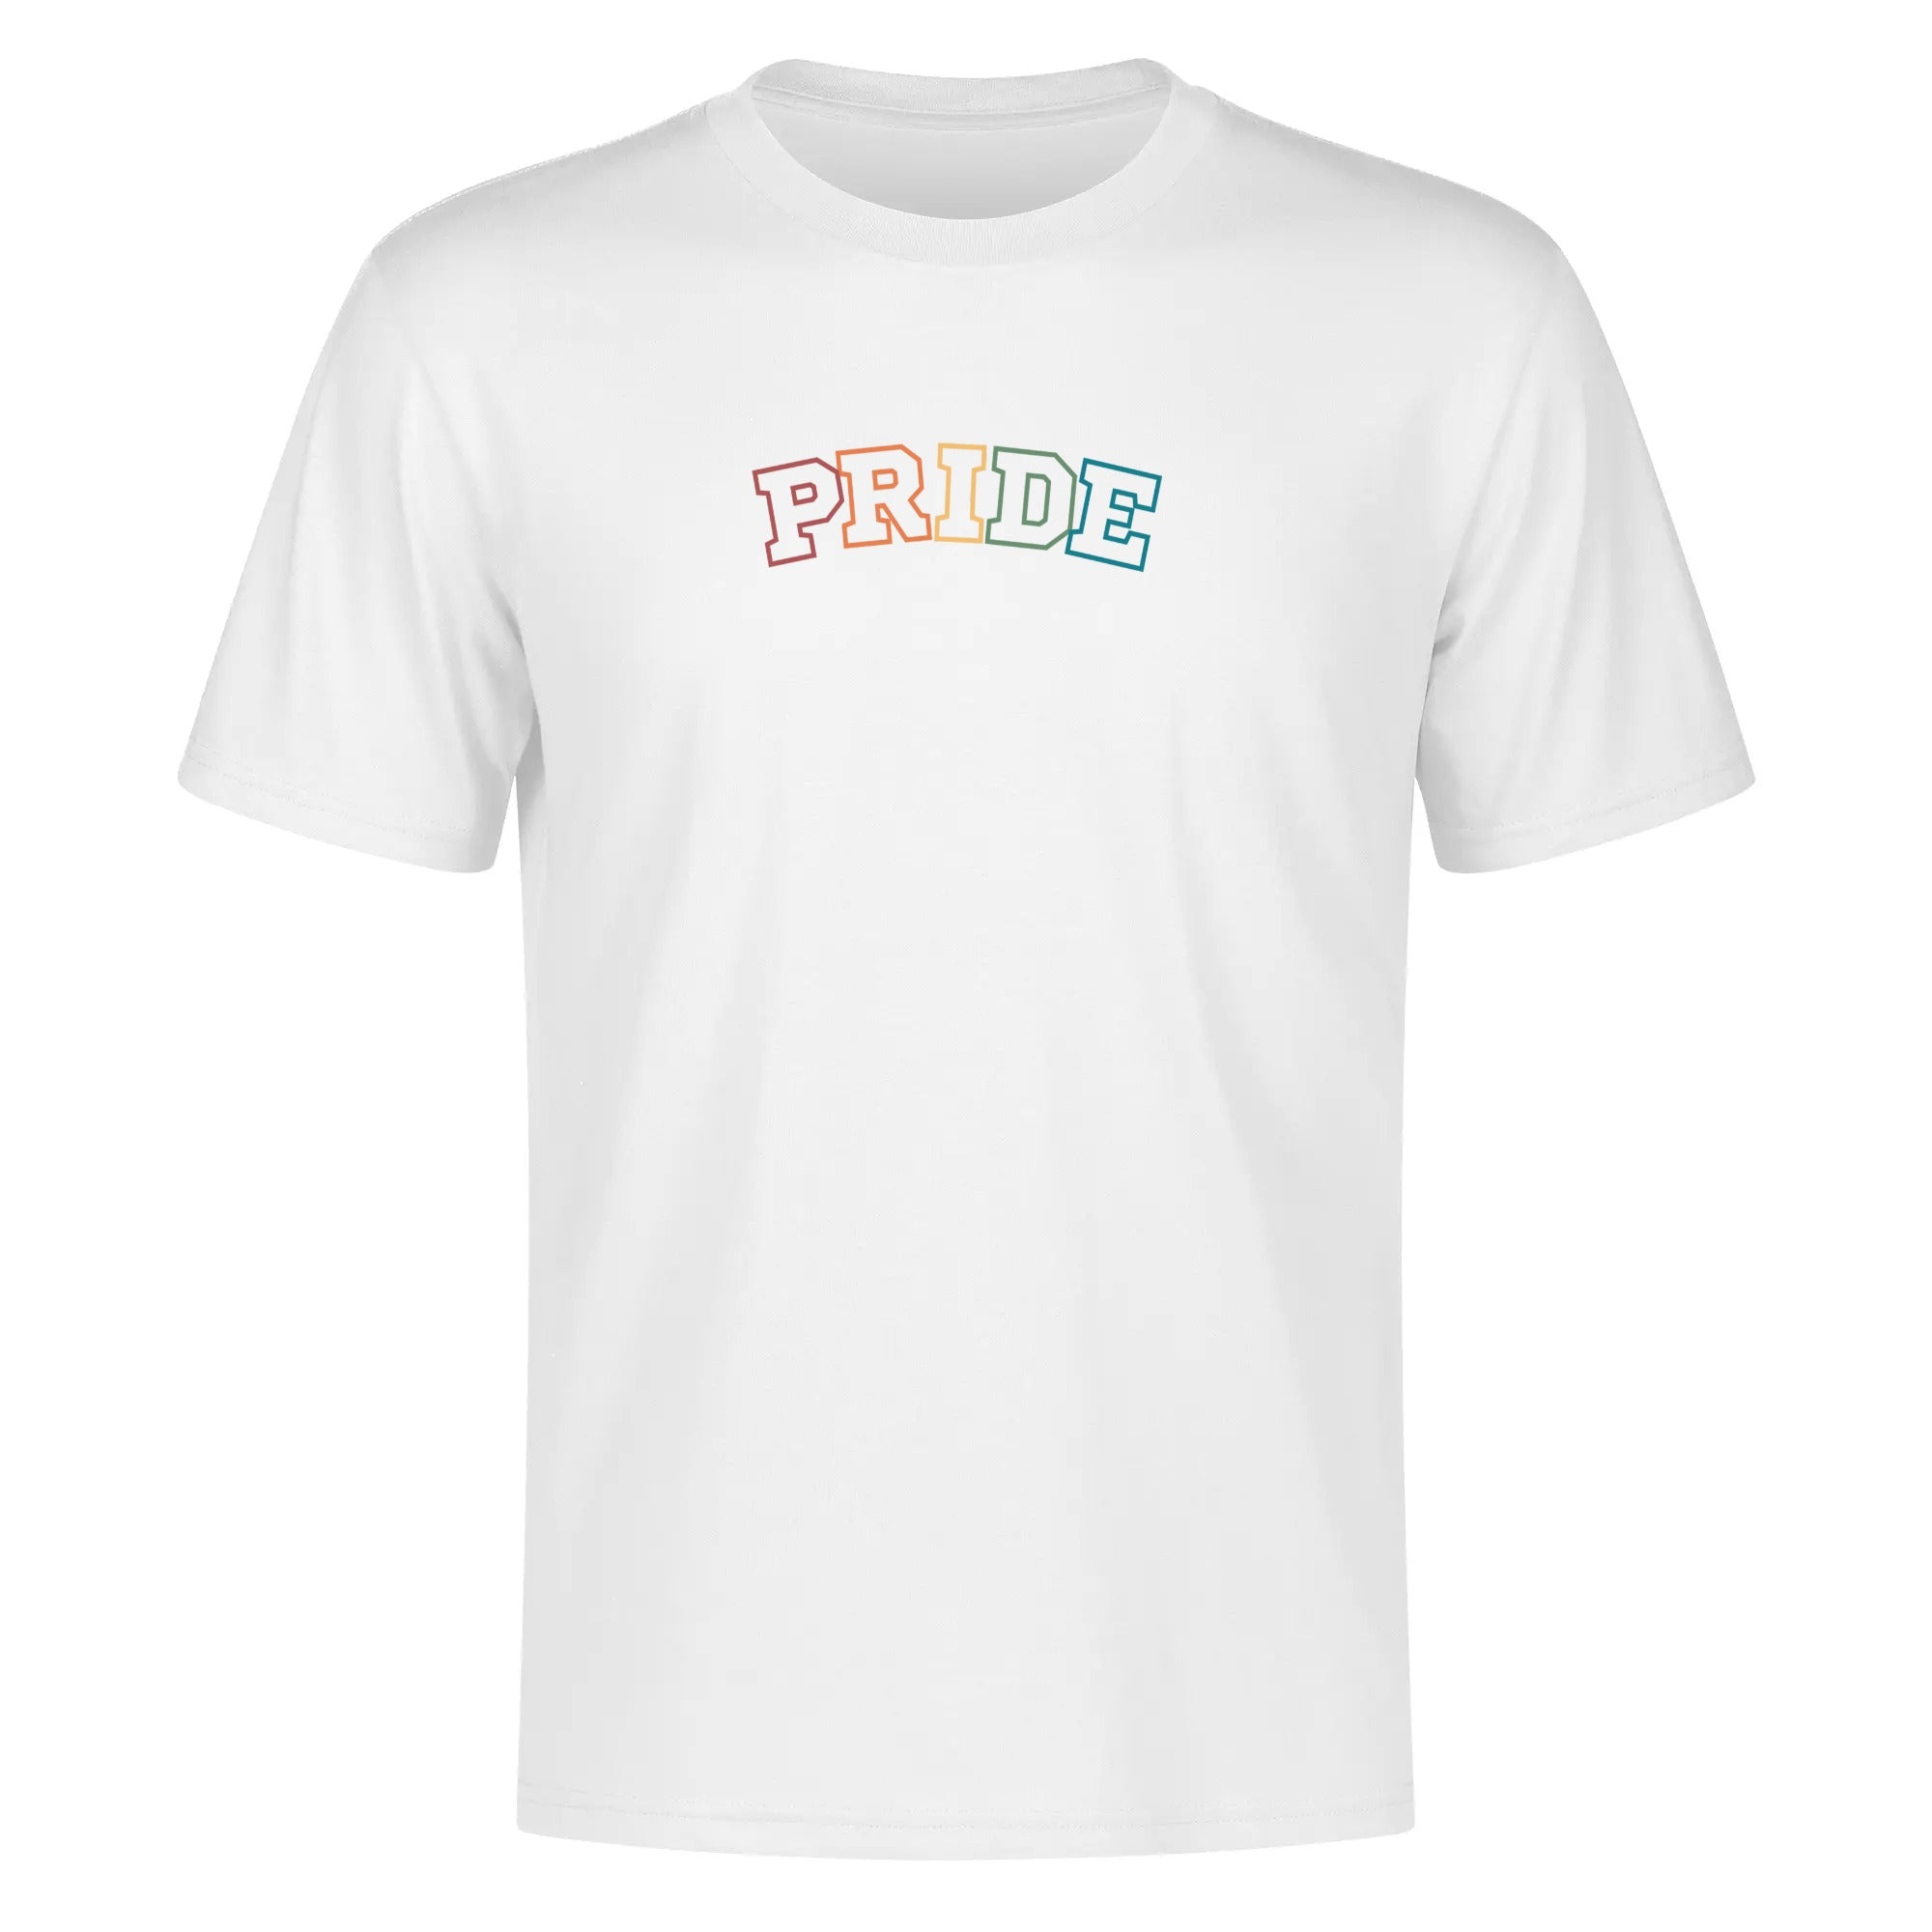 Queer Kids Club Rainbow LGBT Pride T-Shirt - Rose Gold Co. Shop